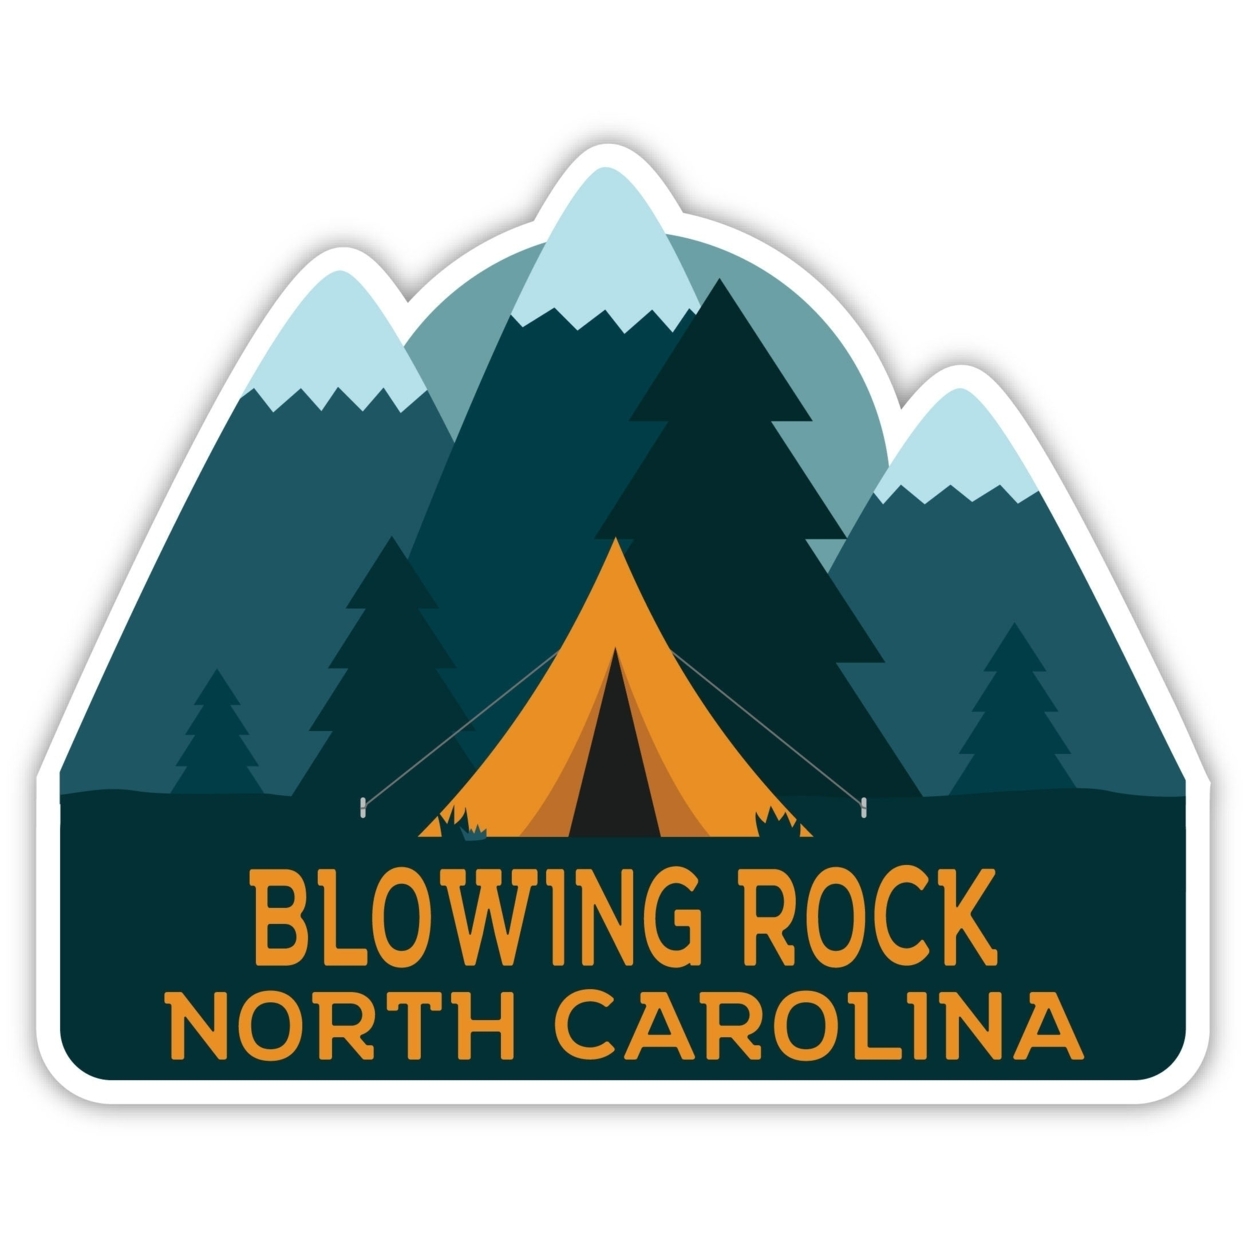 Blowing Rock North Carolina Souvenir Decorative Stickers (Choose Theme And Size) - 4-Pack, 6-Inch, Tent